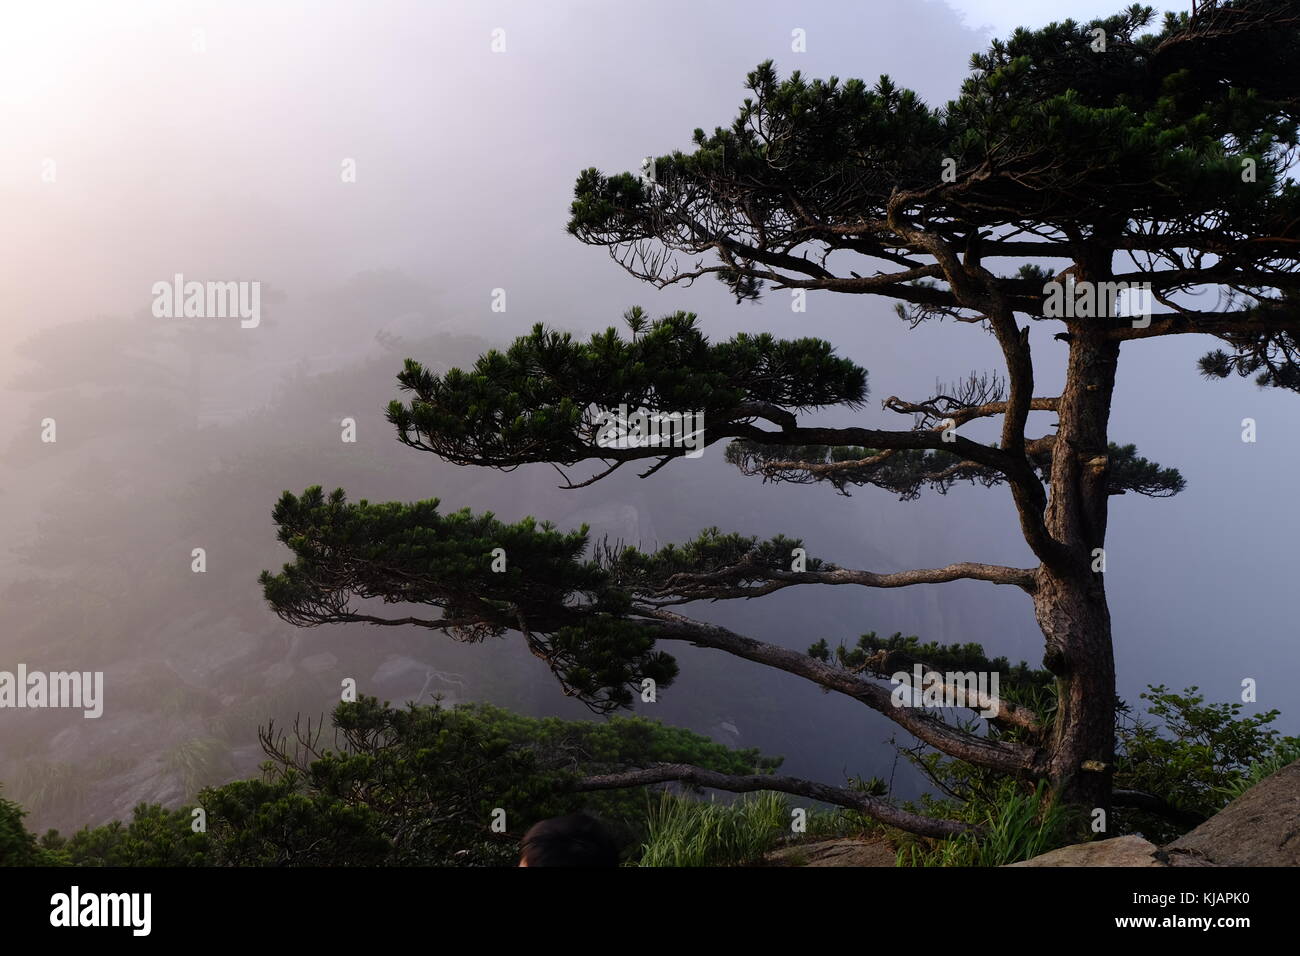 Twisted pine trees of the Huangshan mountains in China Stock Photo ...